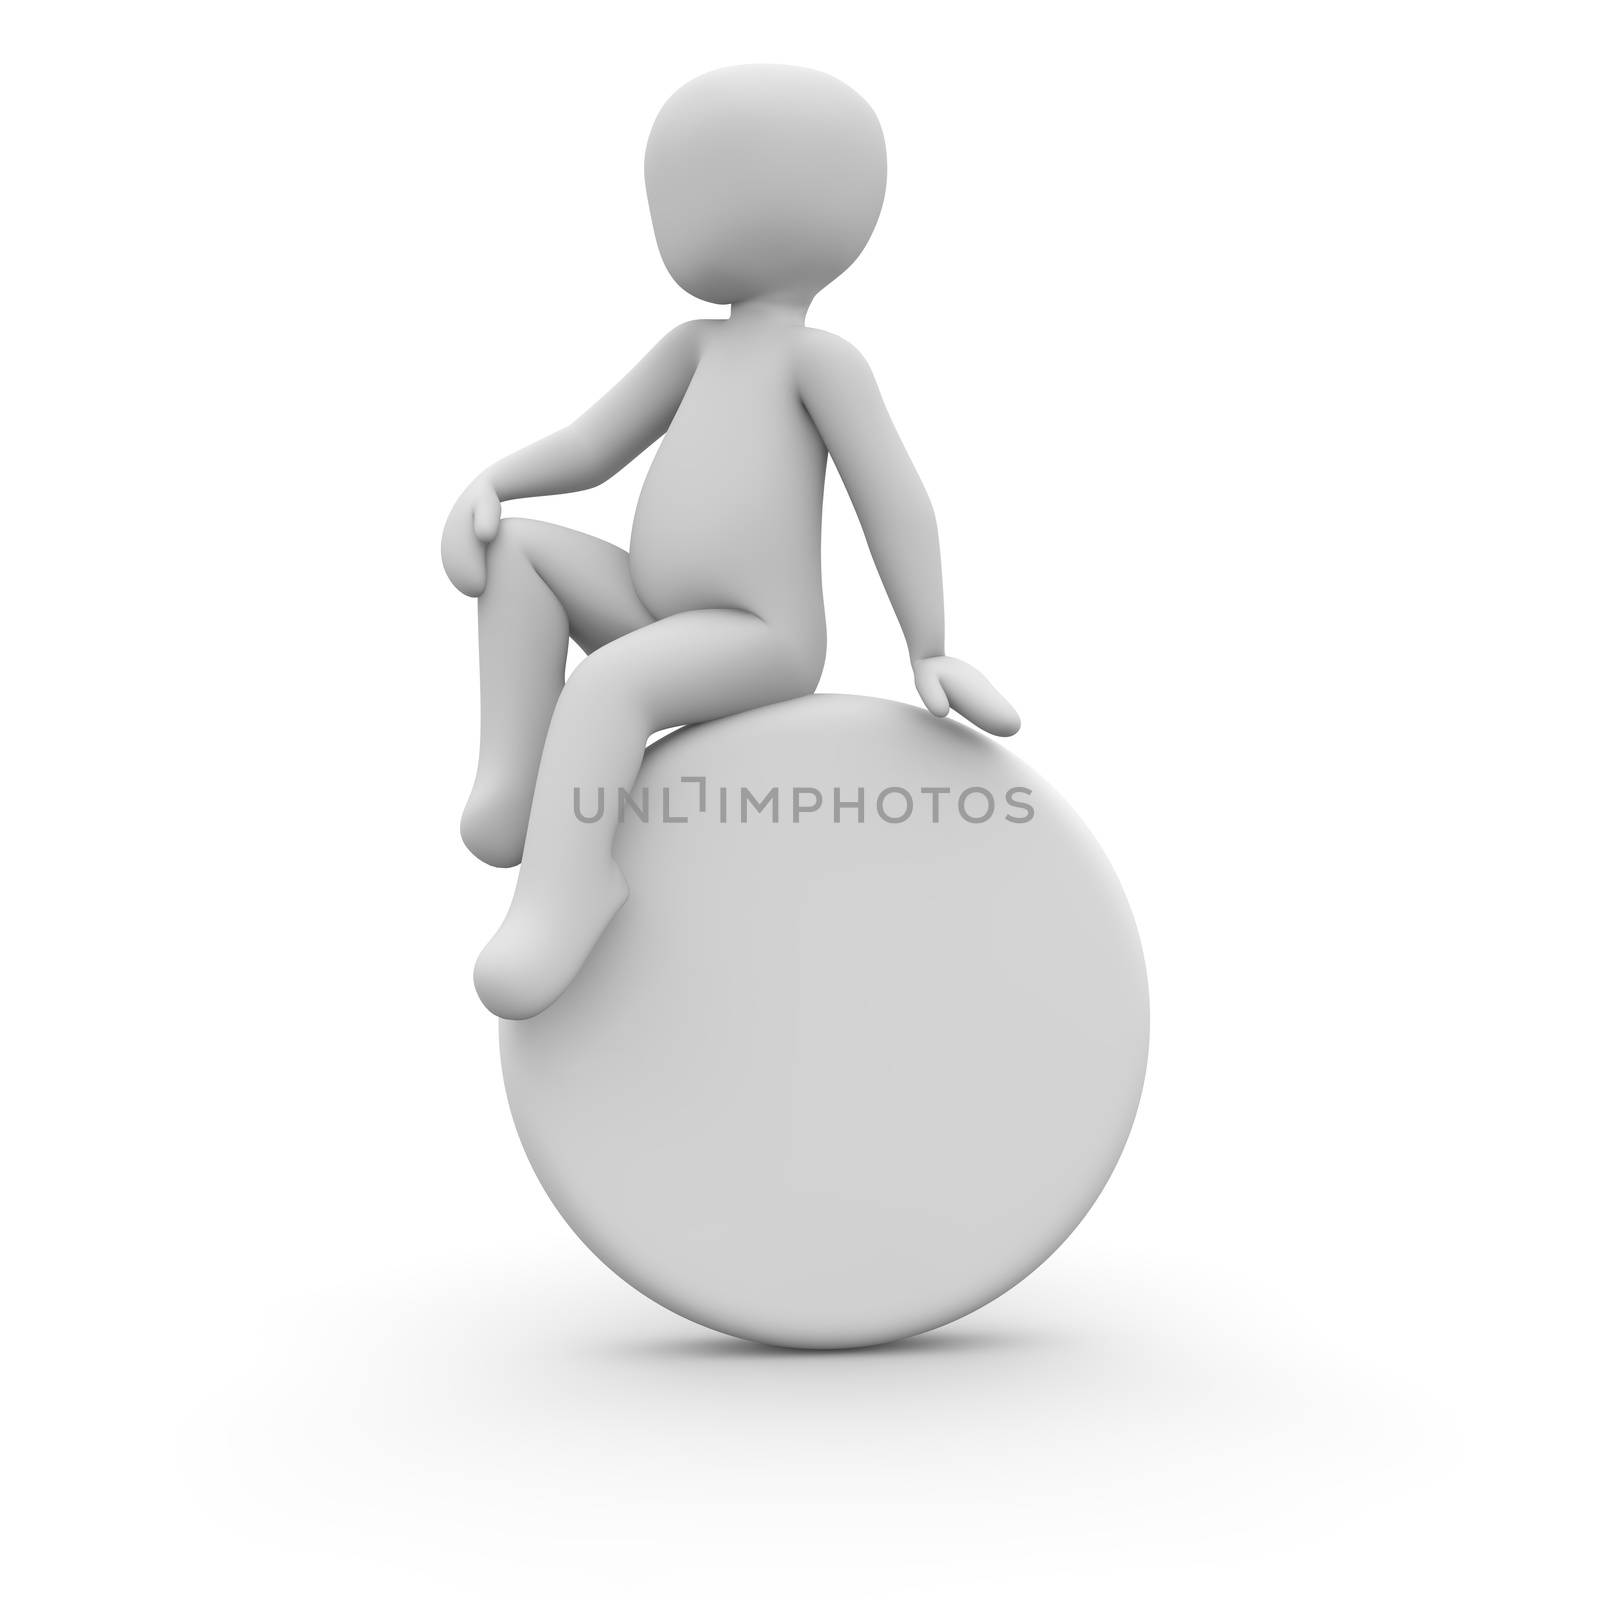 The character sitting on a white circular plate.